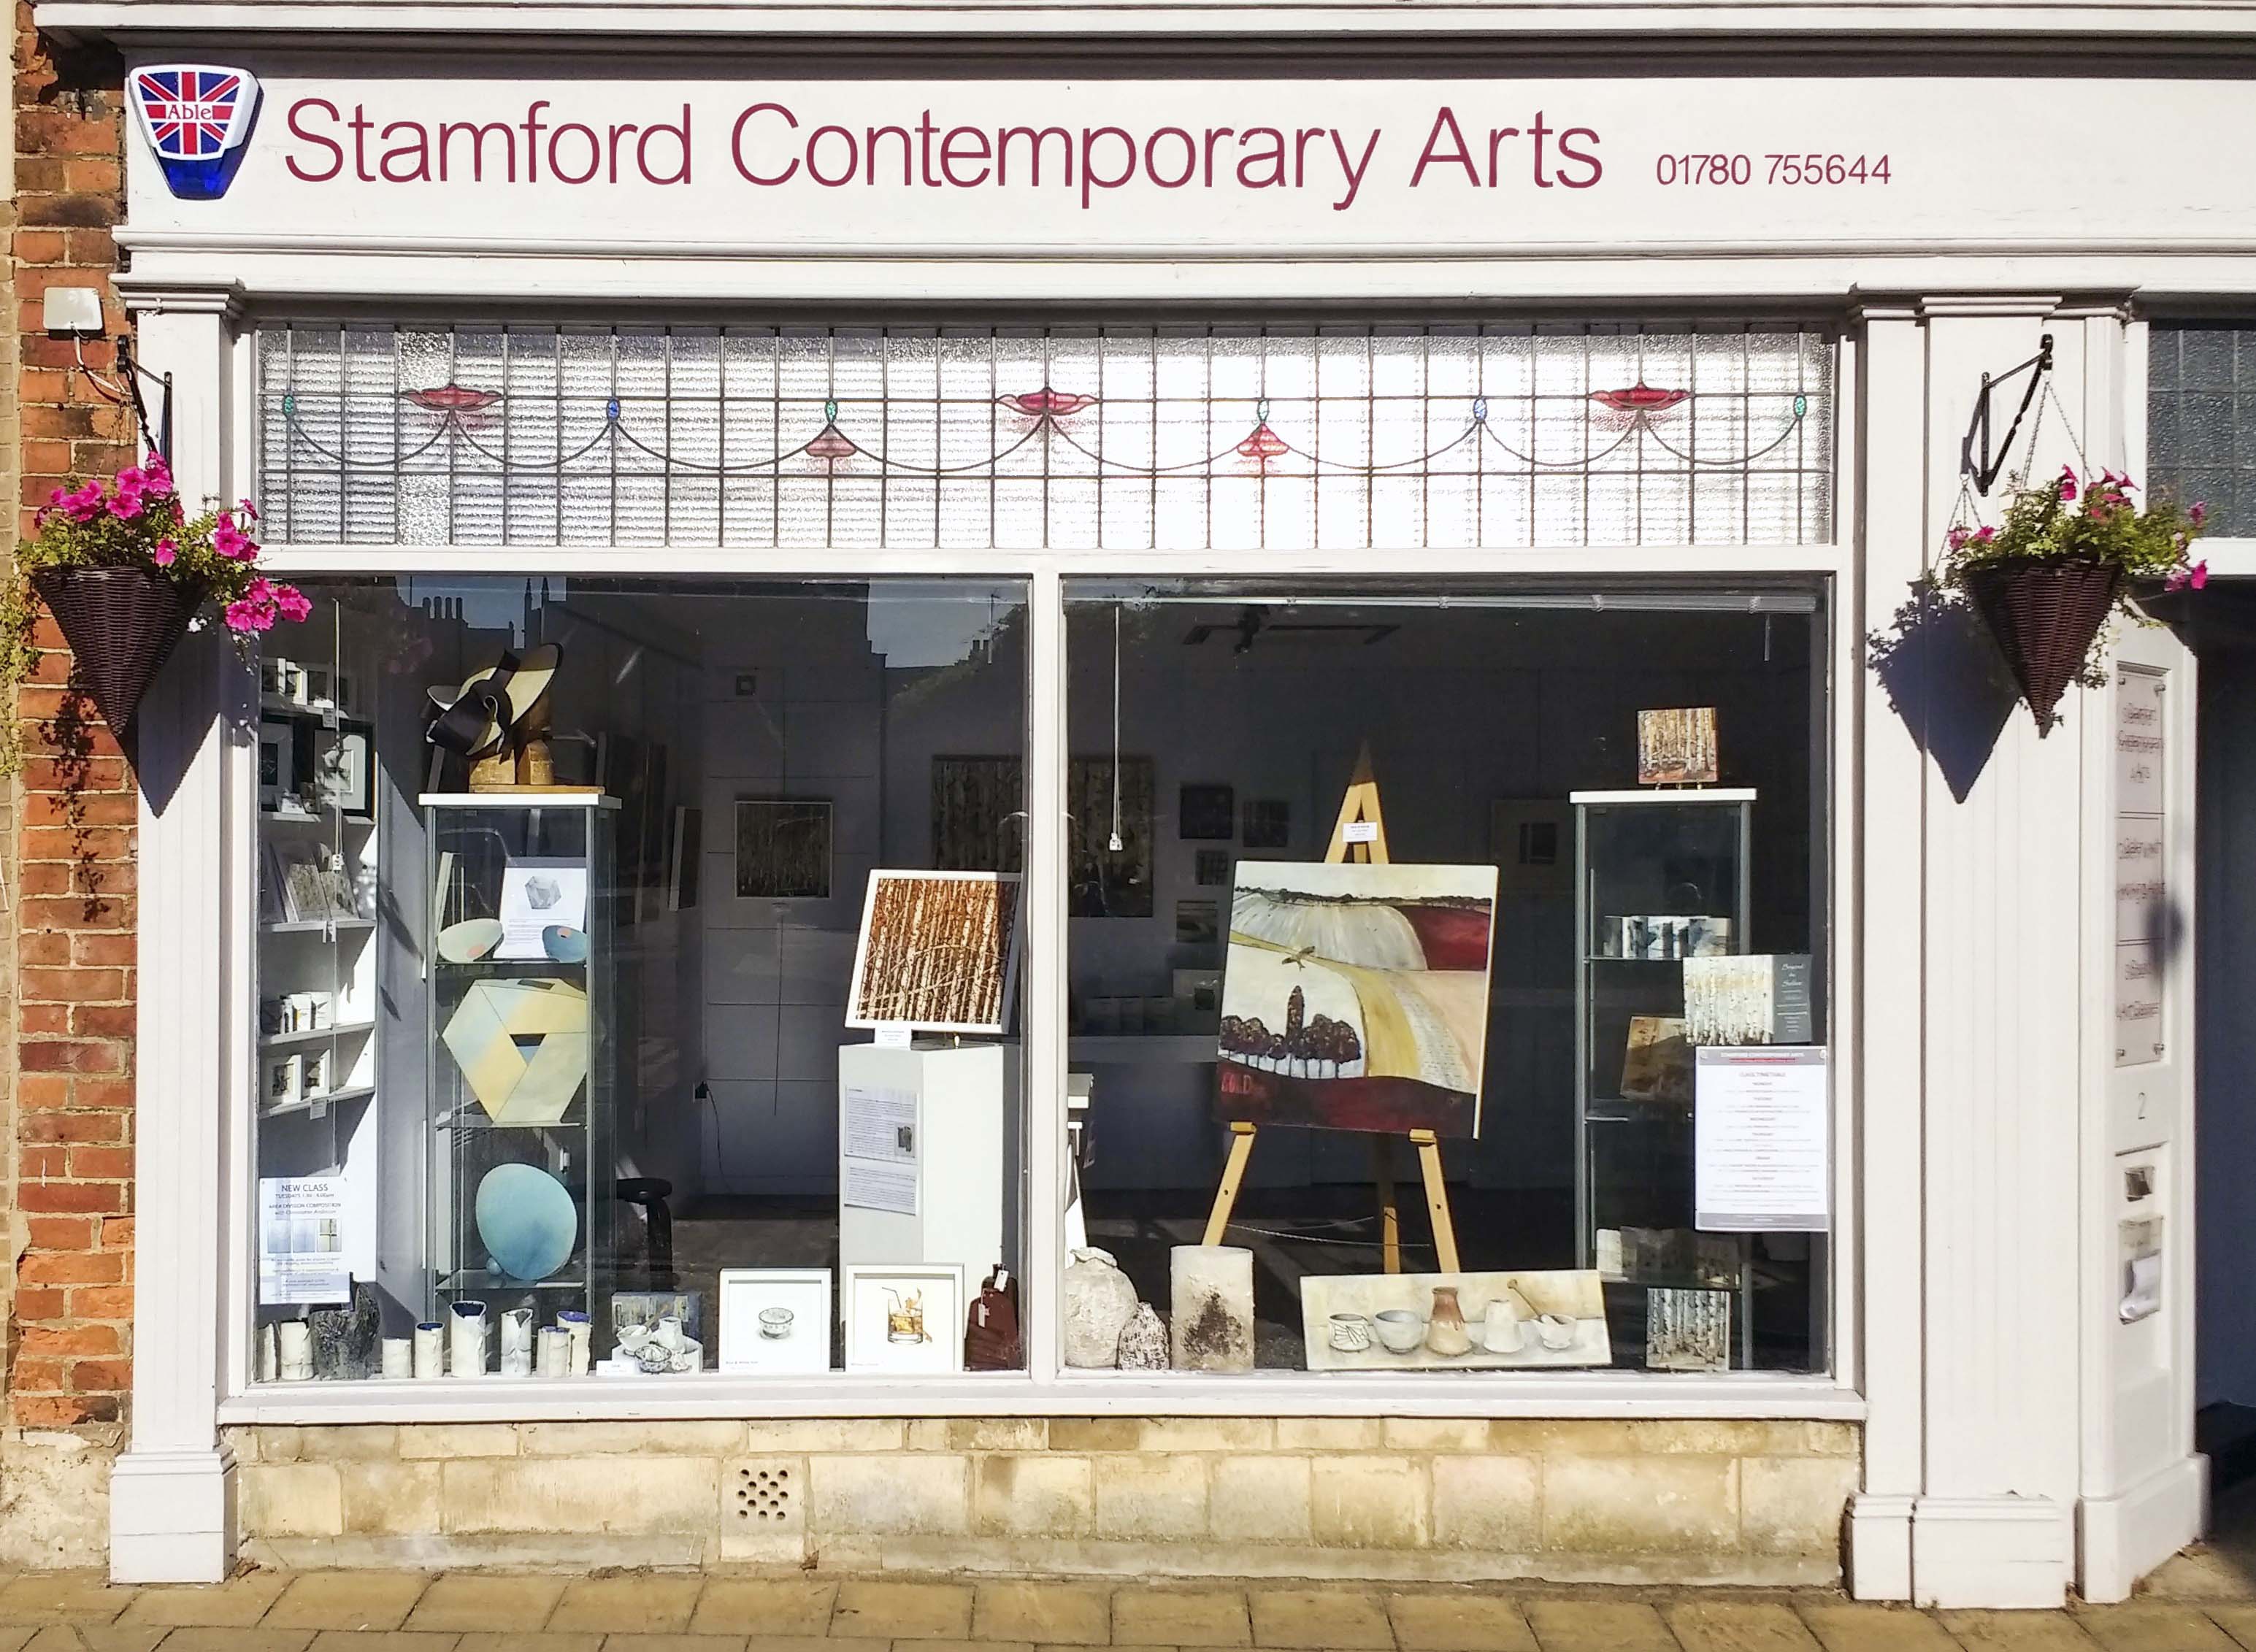 Stamford Contemporary Arts & Gallery.